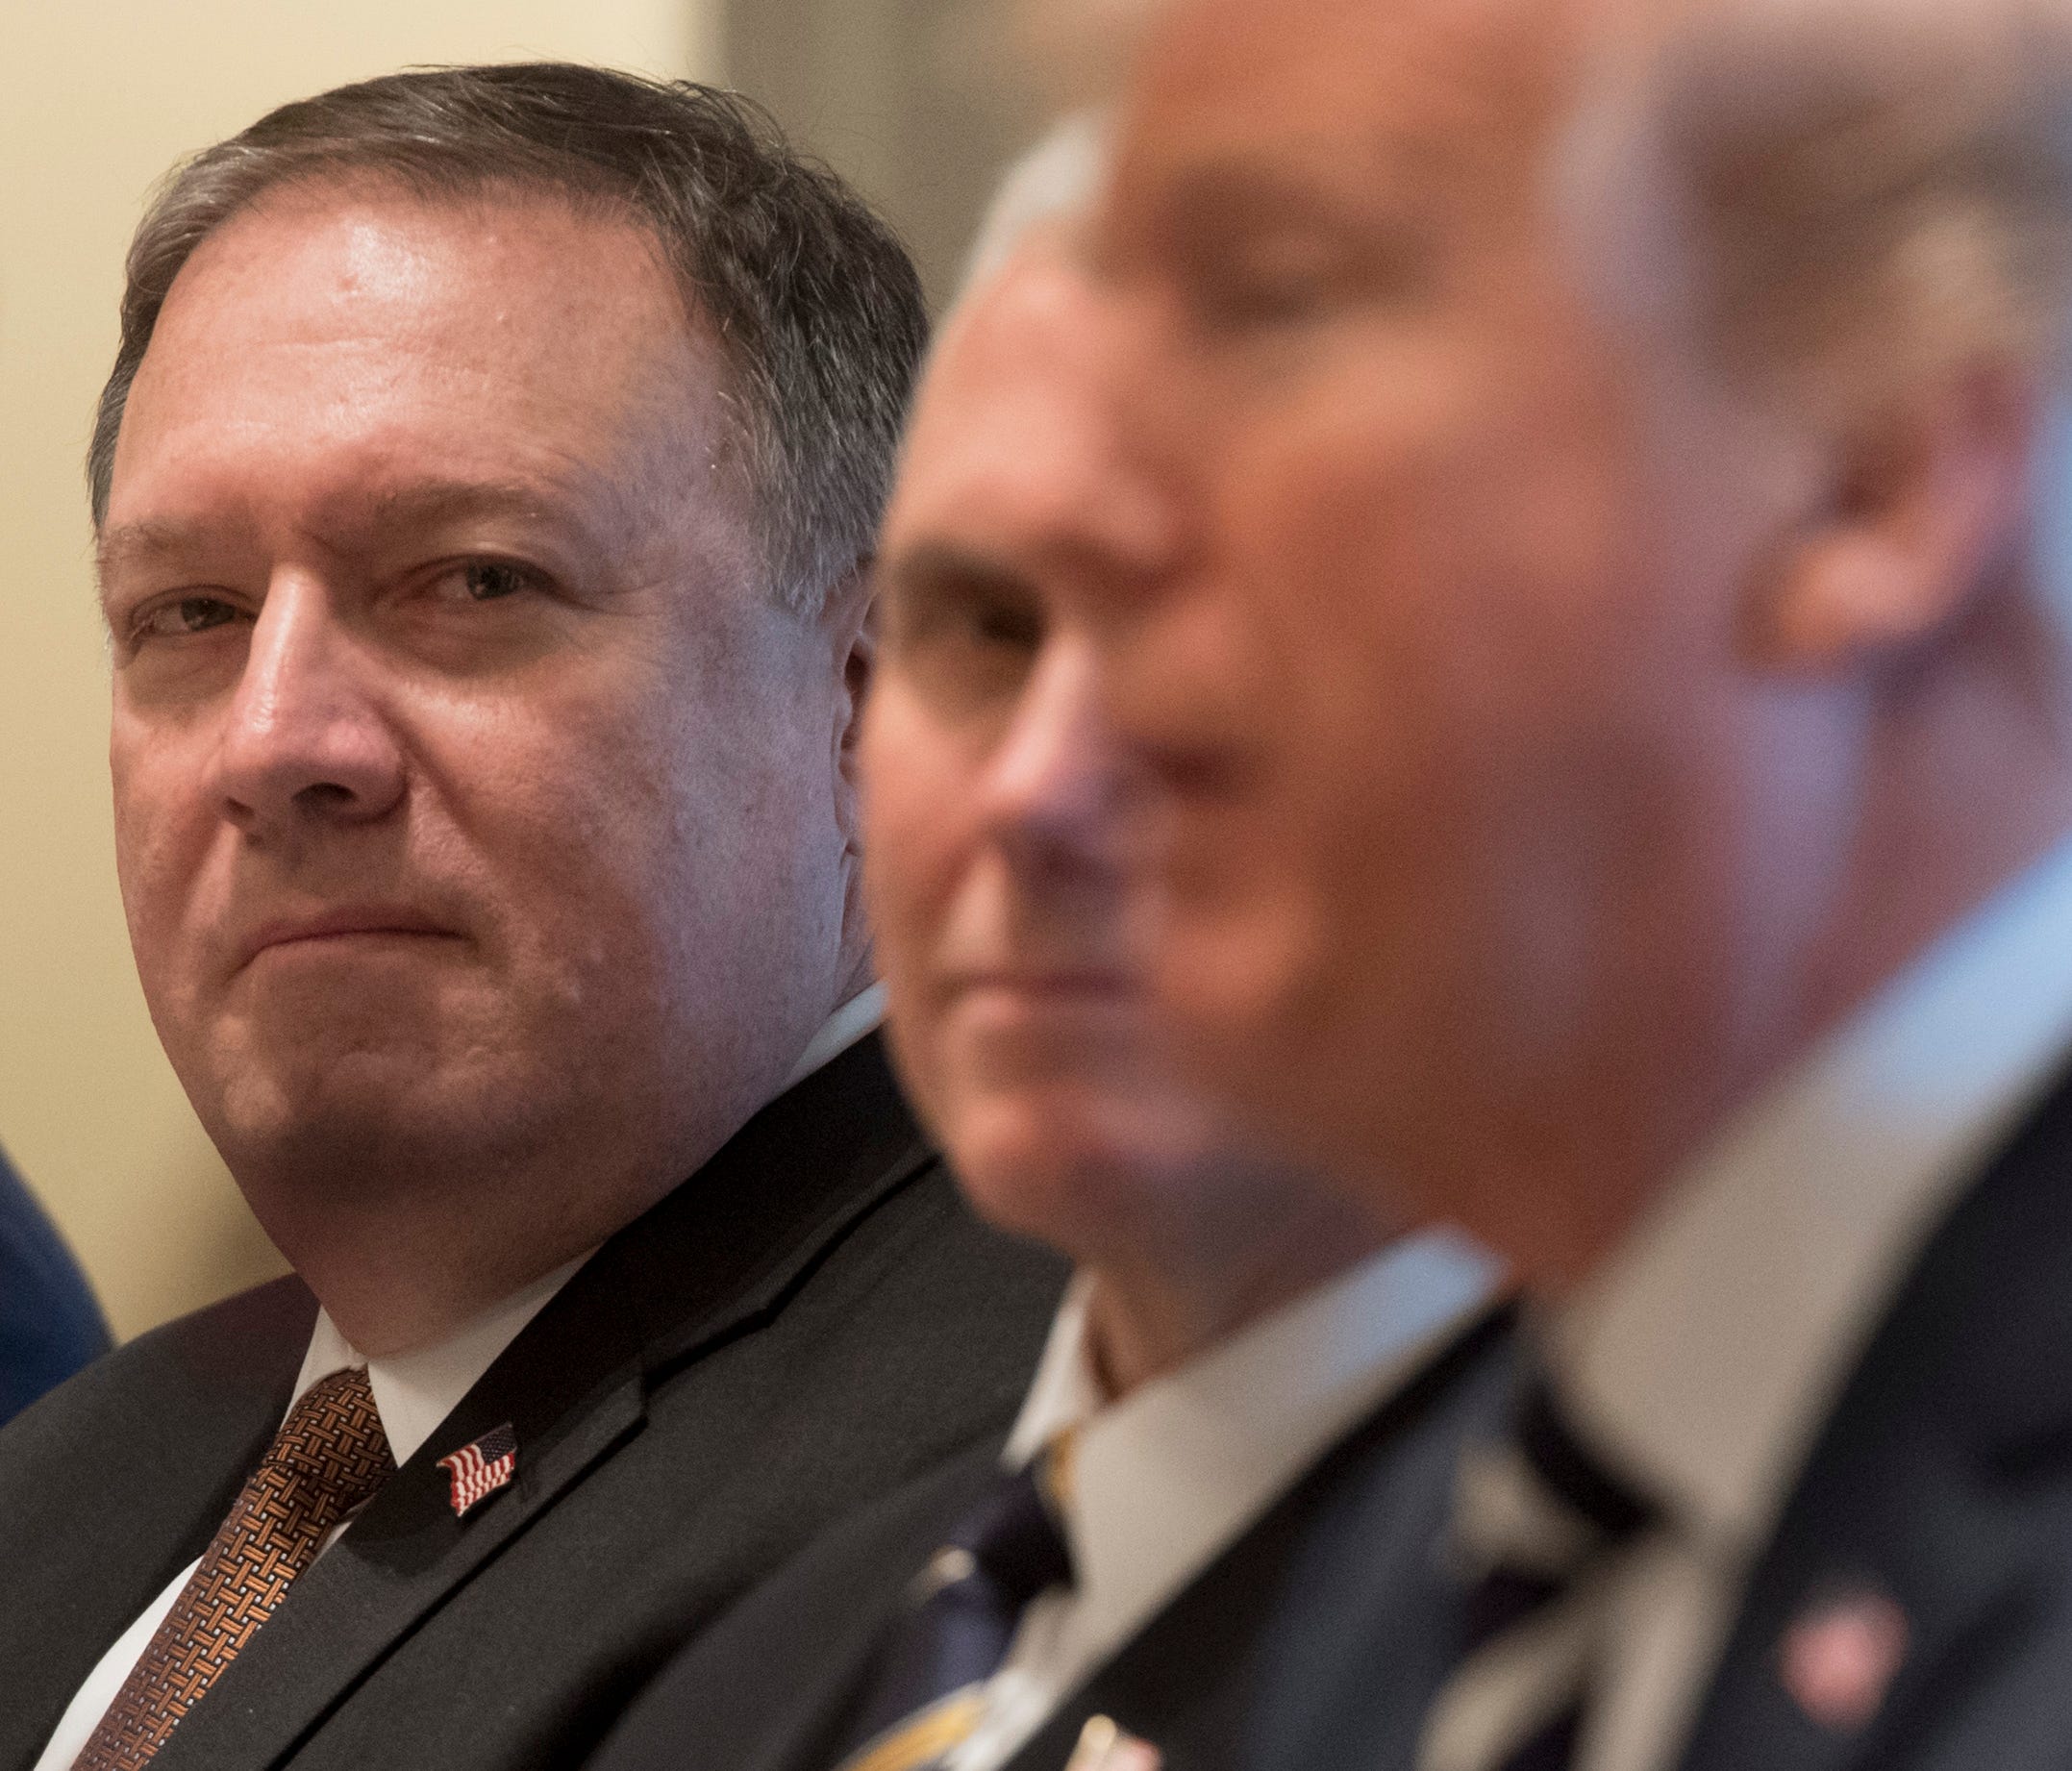 CIA Director and Secretary of State nominee Mike Pompeo (L) attends a lunch meeting with President Trump (R) and Saudi Arabia's Crown Prince Mohammed bin Salman, and members of his delegation, in the Cabinet Room of the White House in Washington, DC,